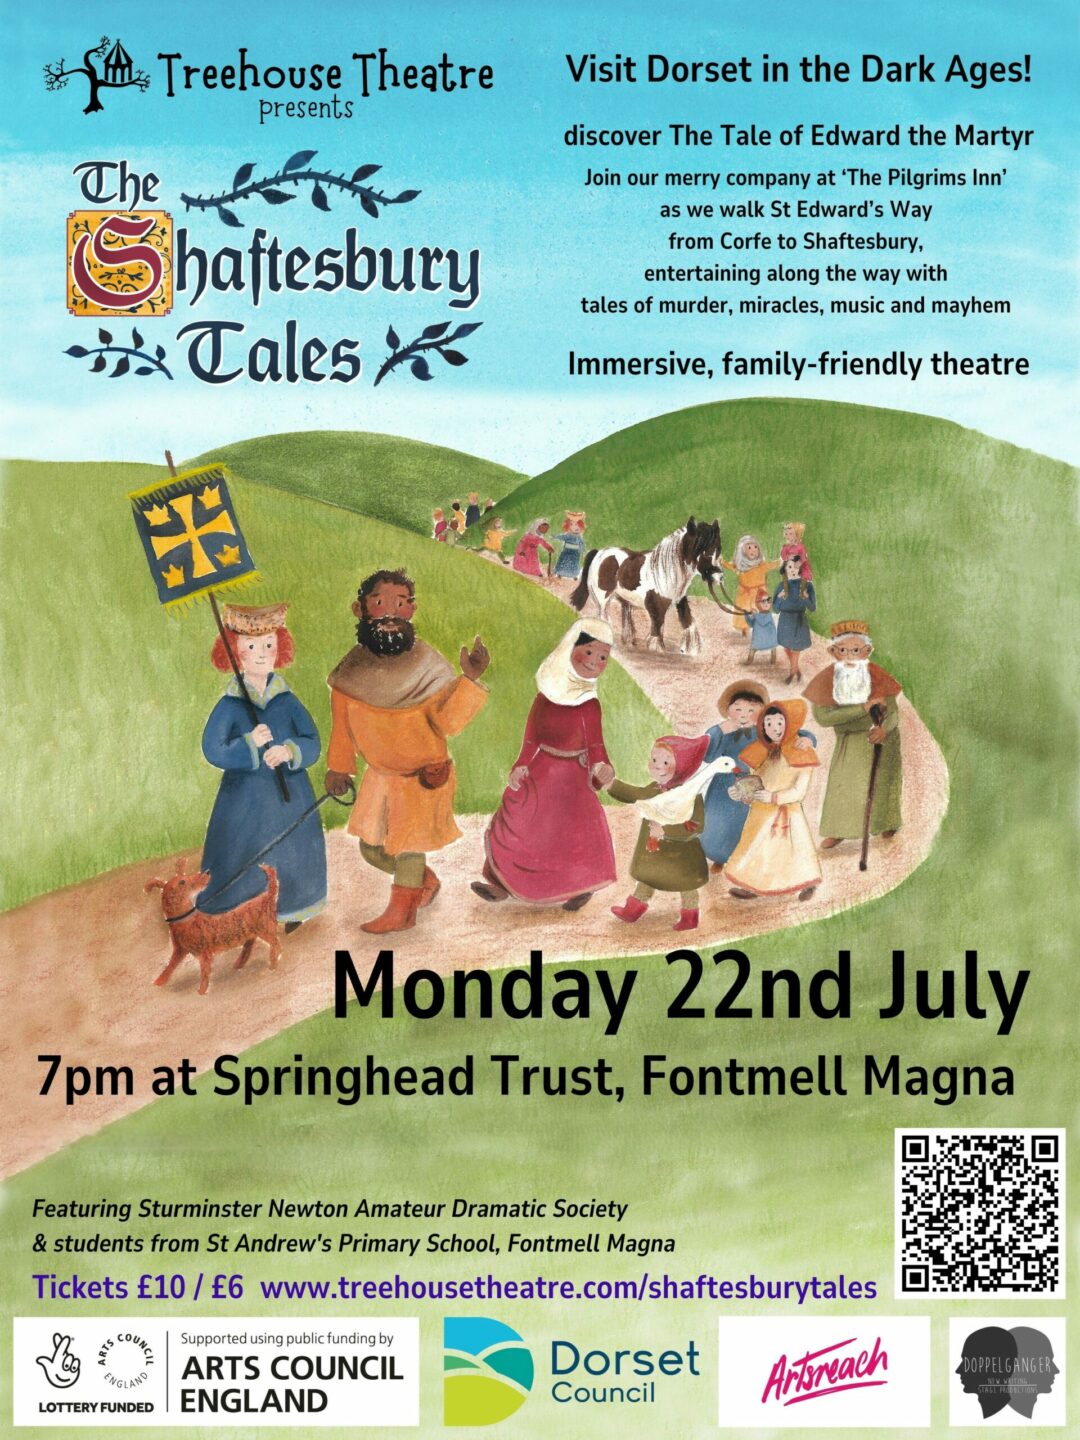 Monday 22nd July, The Shaftesbury Tales – Visit Dorset in the Dark Ages!